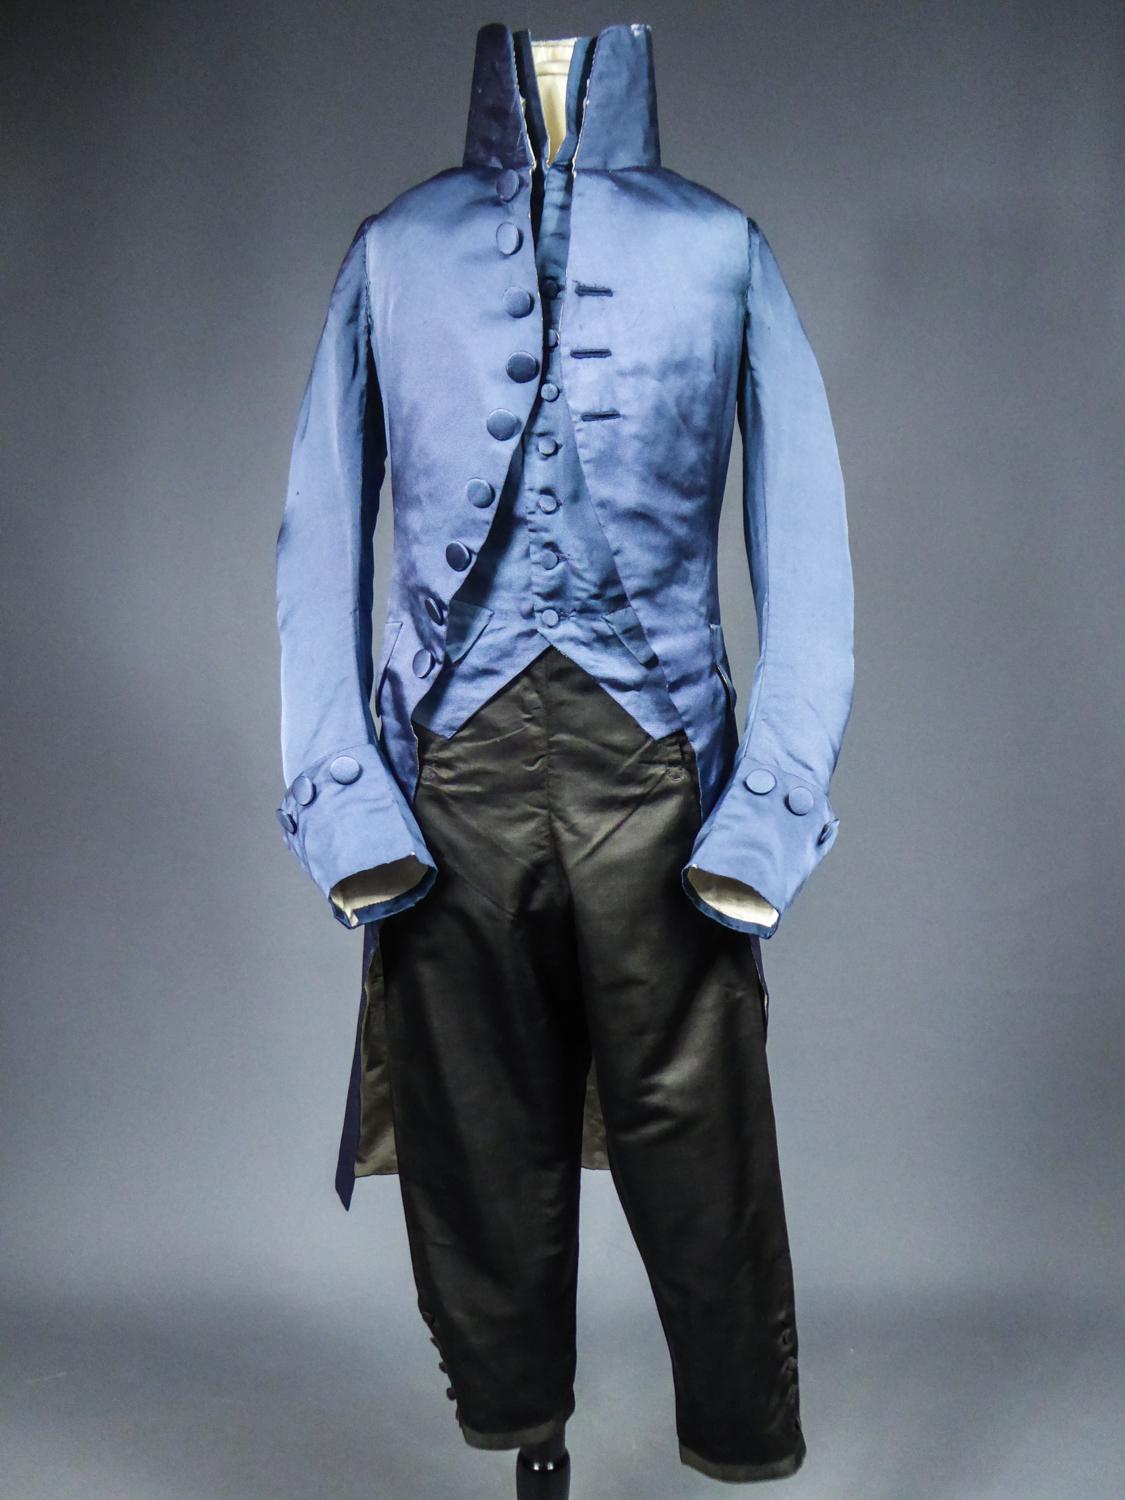 Circa 1800/1810
France_ Oberkampf Mallet family Provenance

Complete Habit de ville, frock coat and waistcoat in bleu de Prusse silk faille and a brown twill silk breeches in connection with the Dandy silhouette of the beginning of the 19th century.